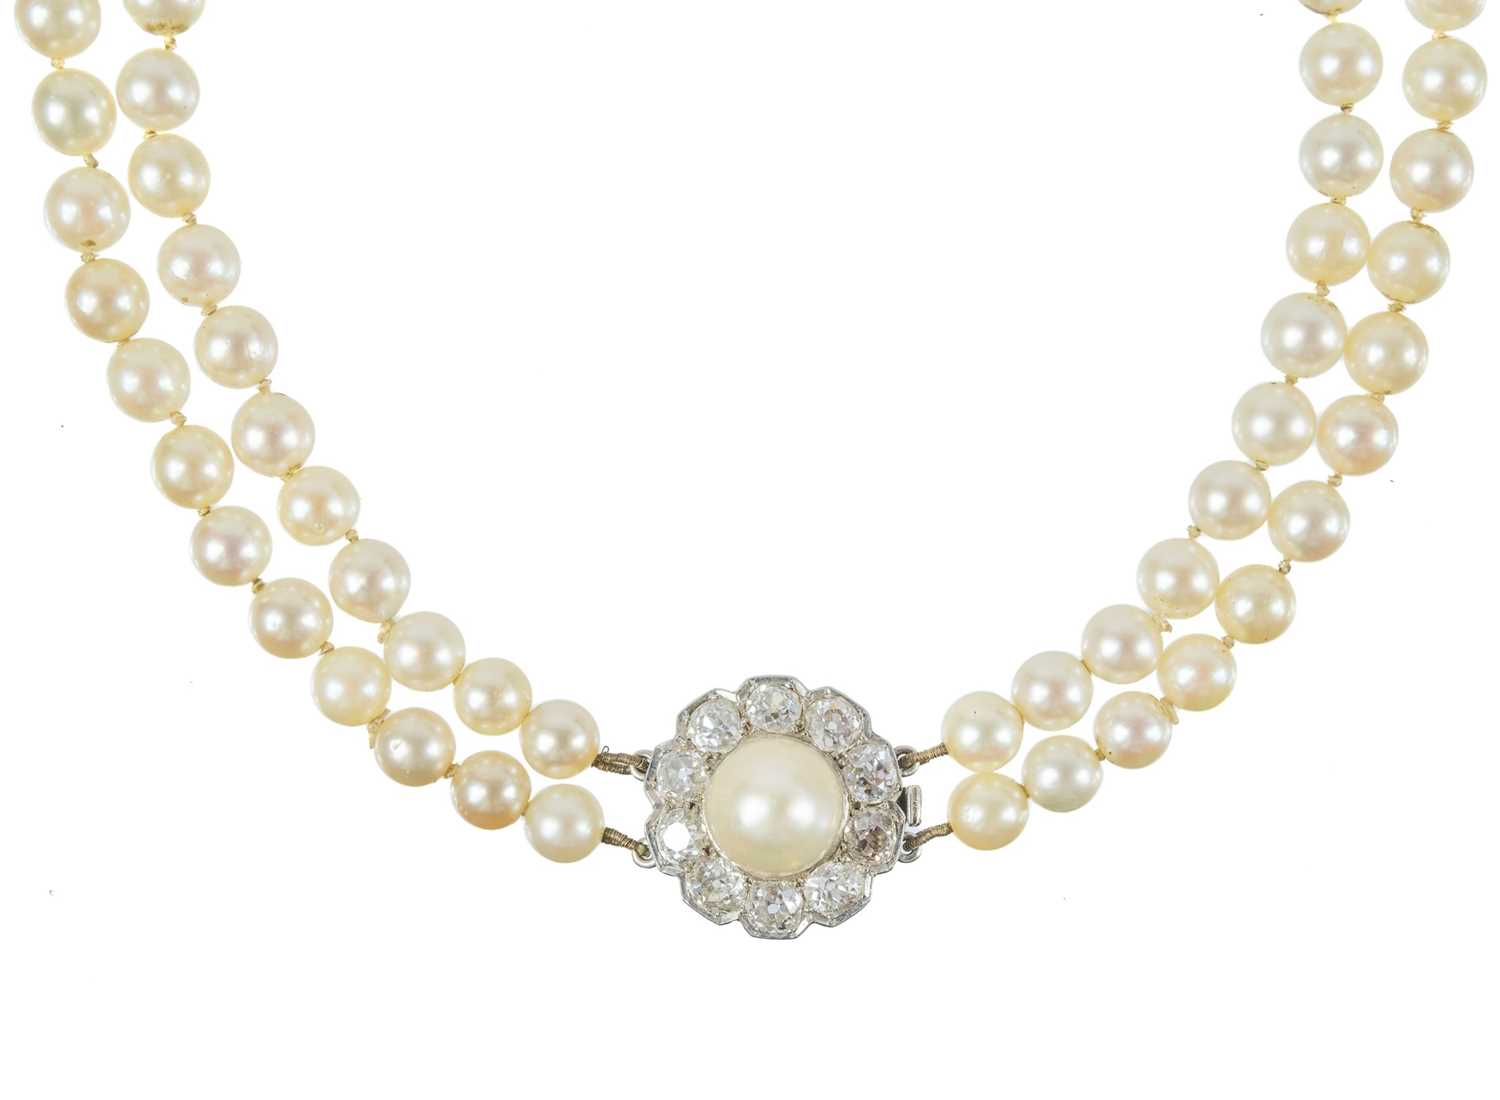 An impressive early 20th century cultured pearl, diamond set, double-row necklace & earrings suite. - Image 4 of 9